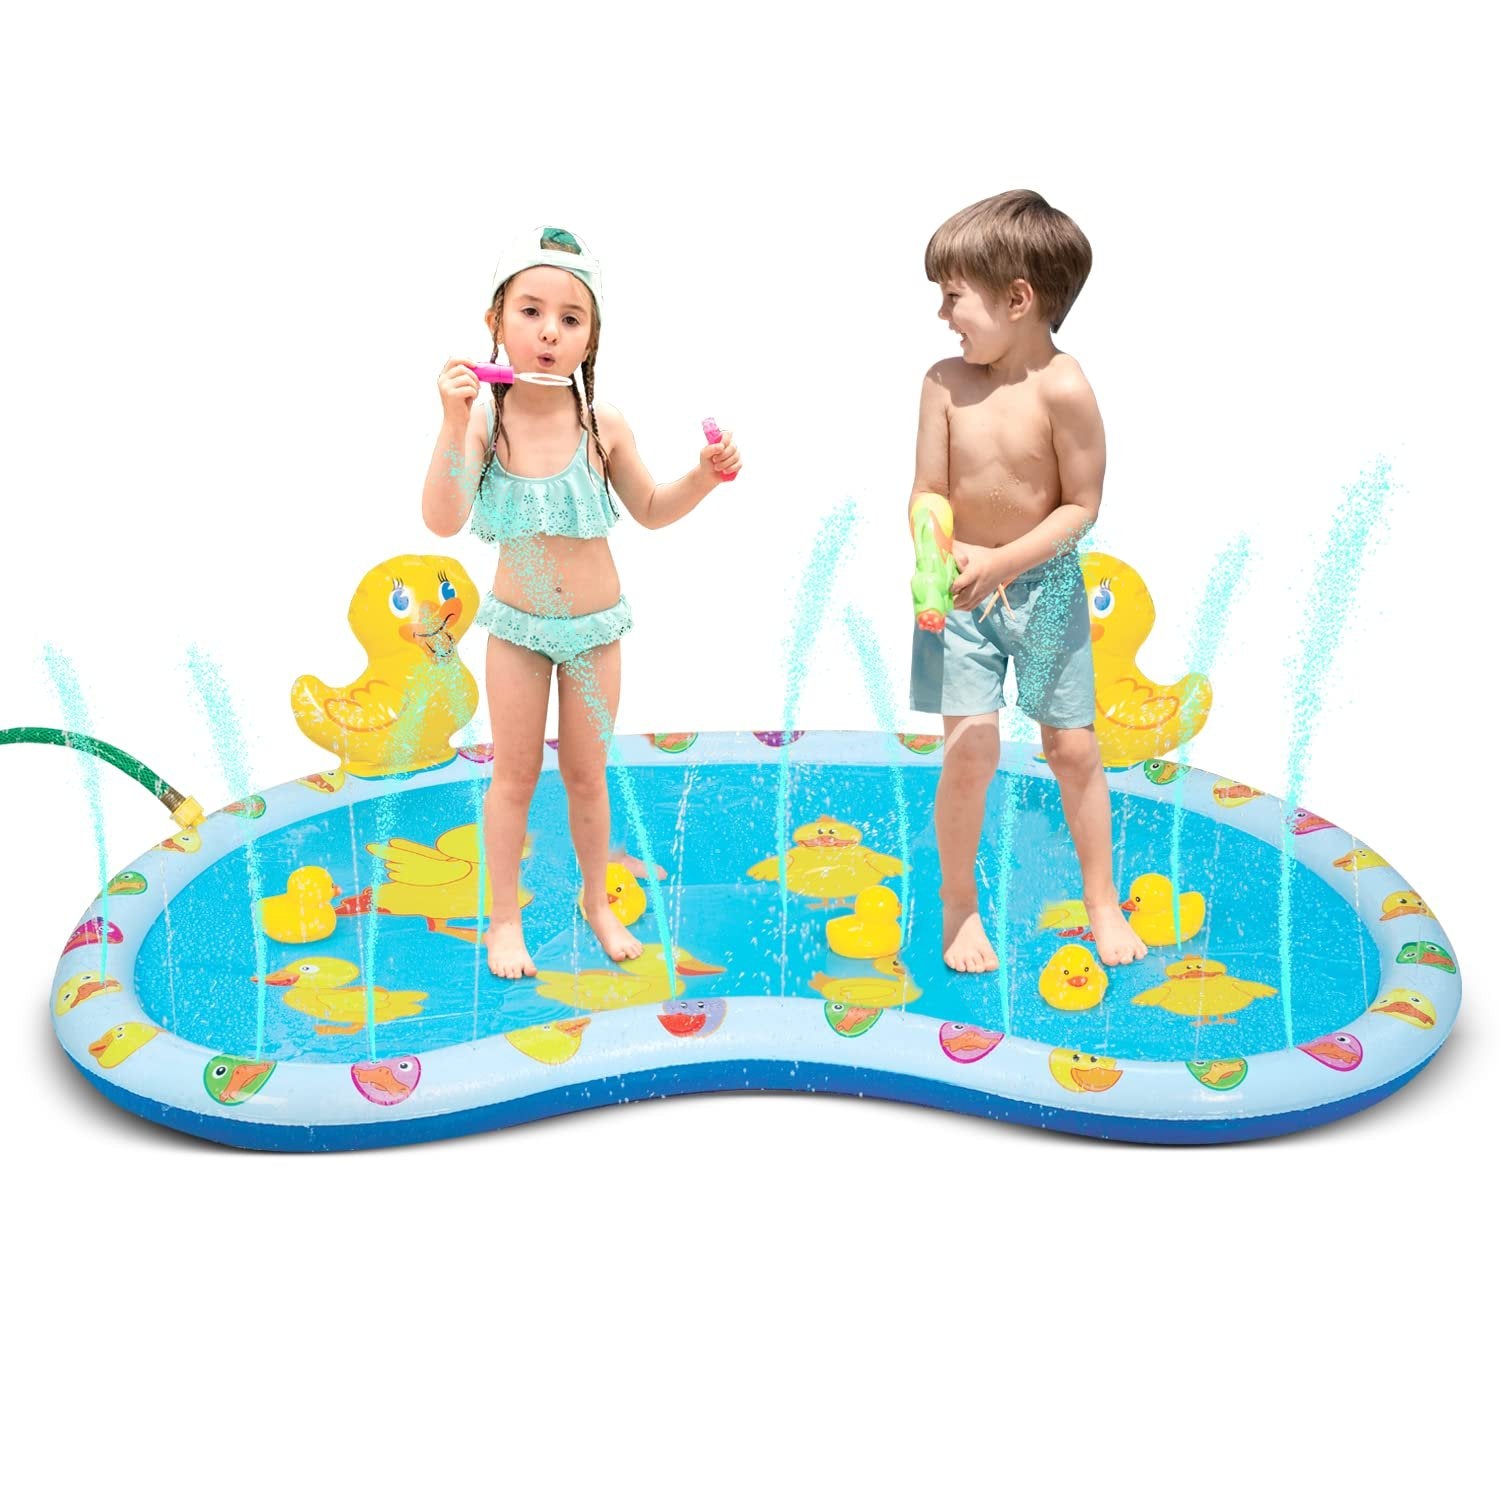 Bundaloo Baby Splash Pad Sprinkler with 4 Rubber Duck Toys - Fun Kiddie Pool Mat for Babies and Toddlers with Universal Garden Hose Connection